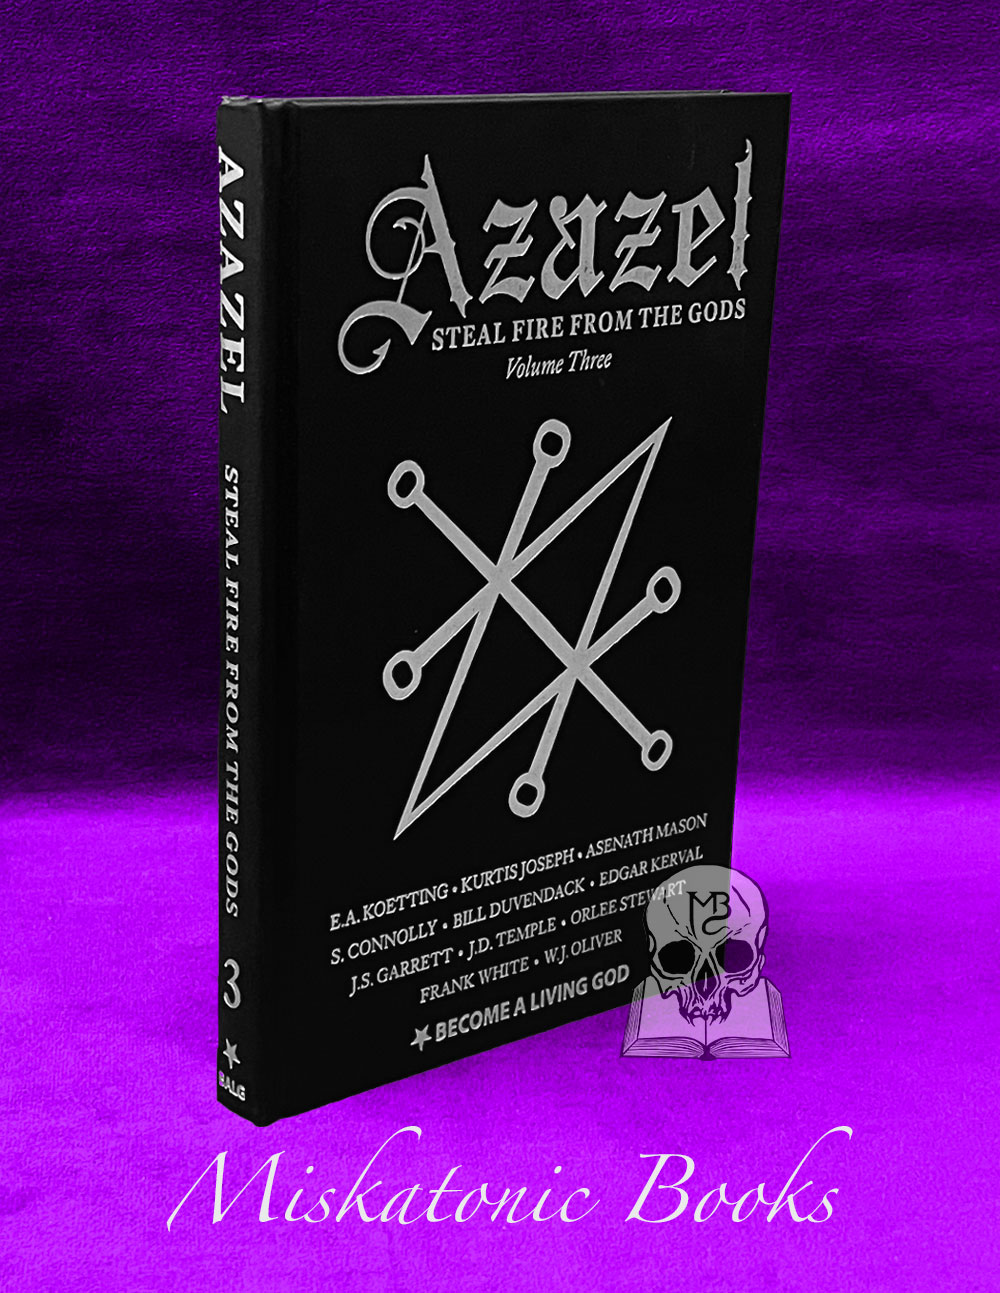 AZAZEL: Steal Fire From The Gods with E.A. Koetting, Asenath Mason, S. Connolly, Edgar Kerval, Bill Duvendack and more - Hardcover Edition Signed by E.A. Koetting